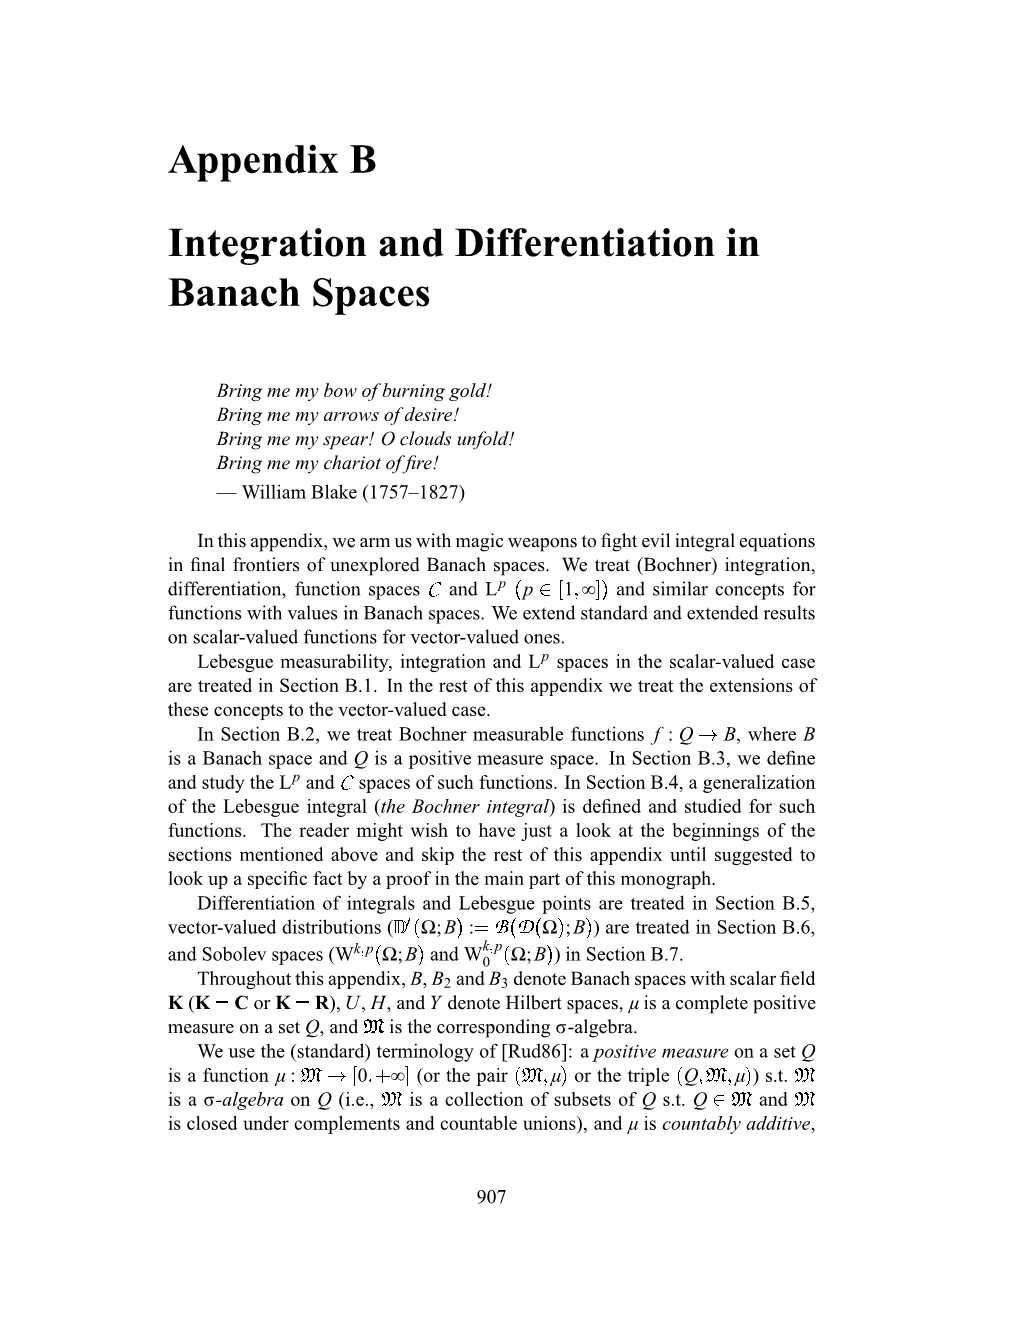 Integration and Differentiation in Banach Spaces